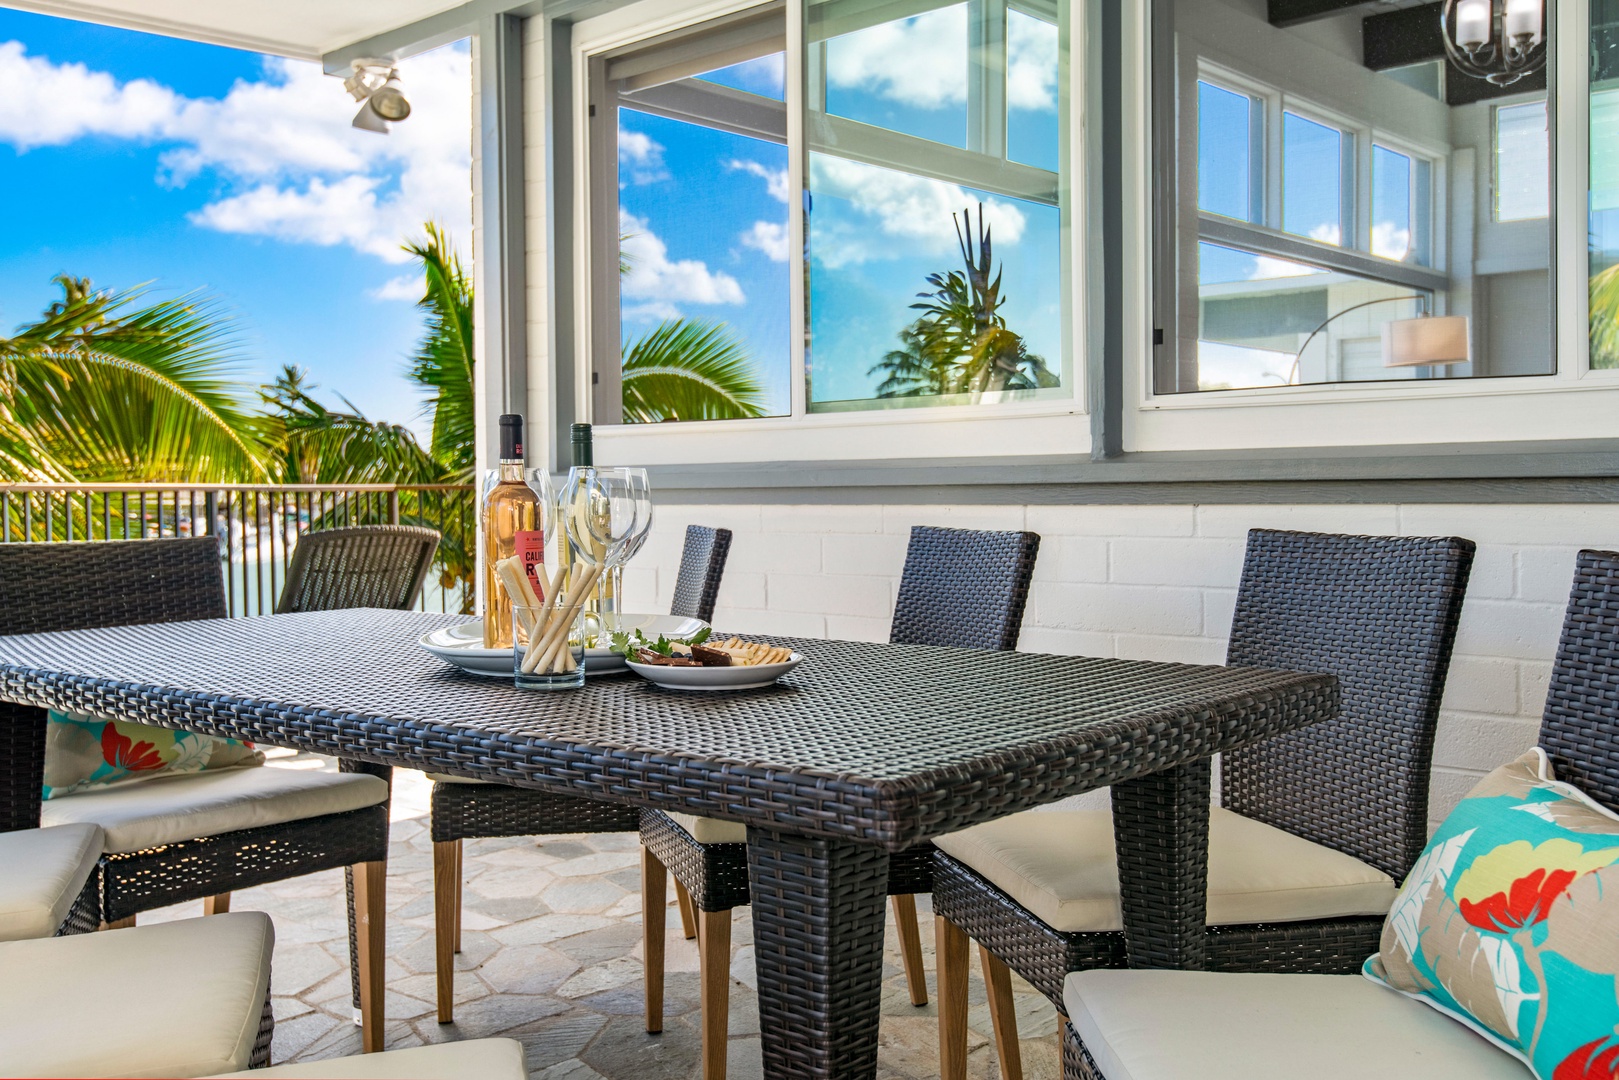 Honolulu Vacation Rentals, Holoholo Hale - Outdoor dining and BBQ lanai.